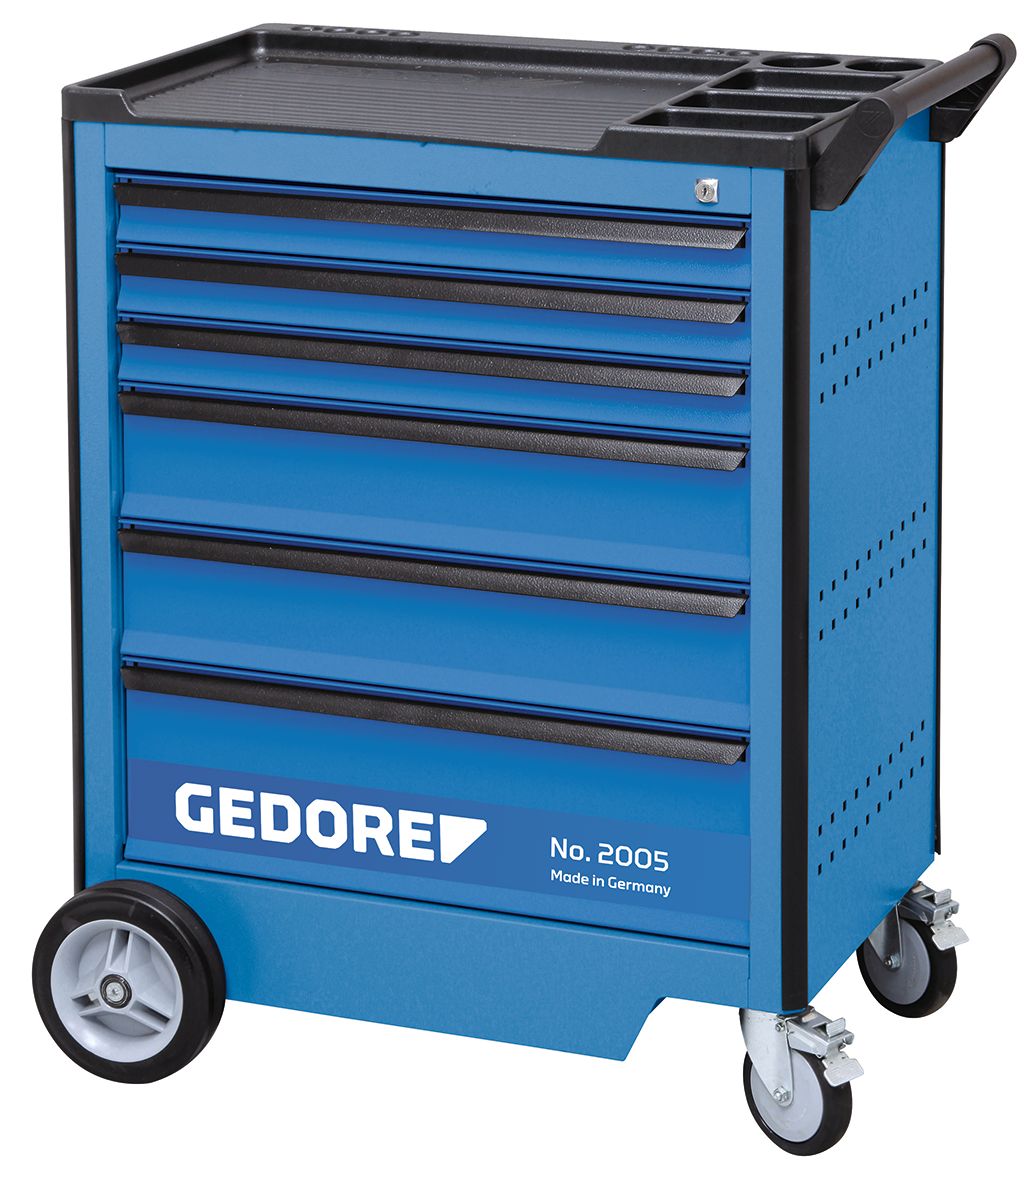 Gedore 2005 0321 Tool trolley with 6 drawers